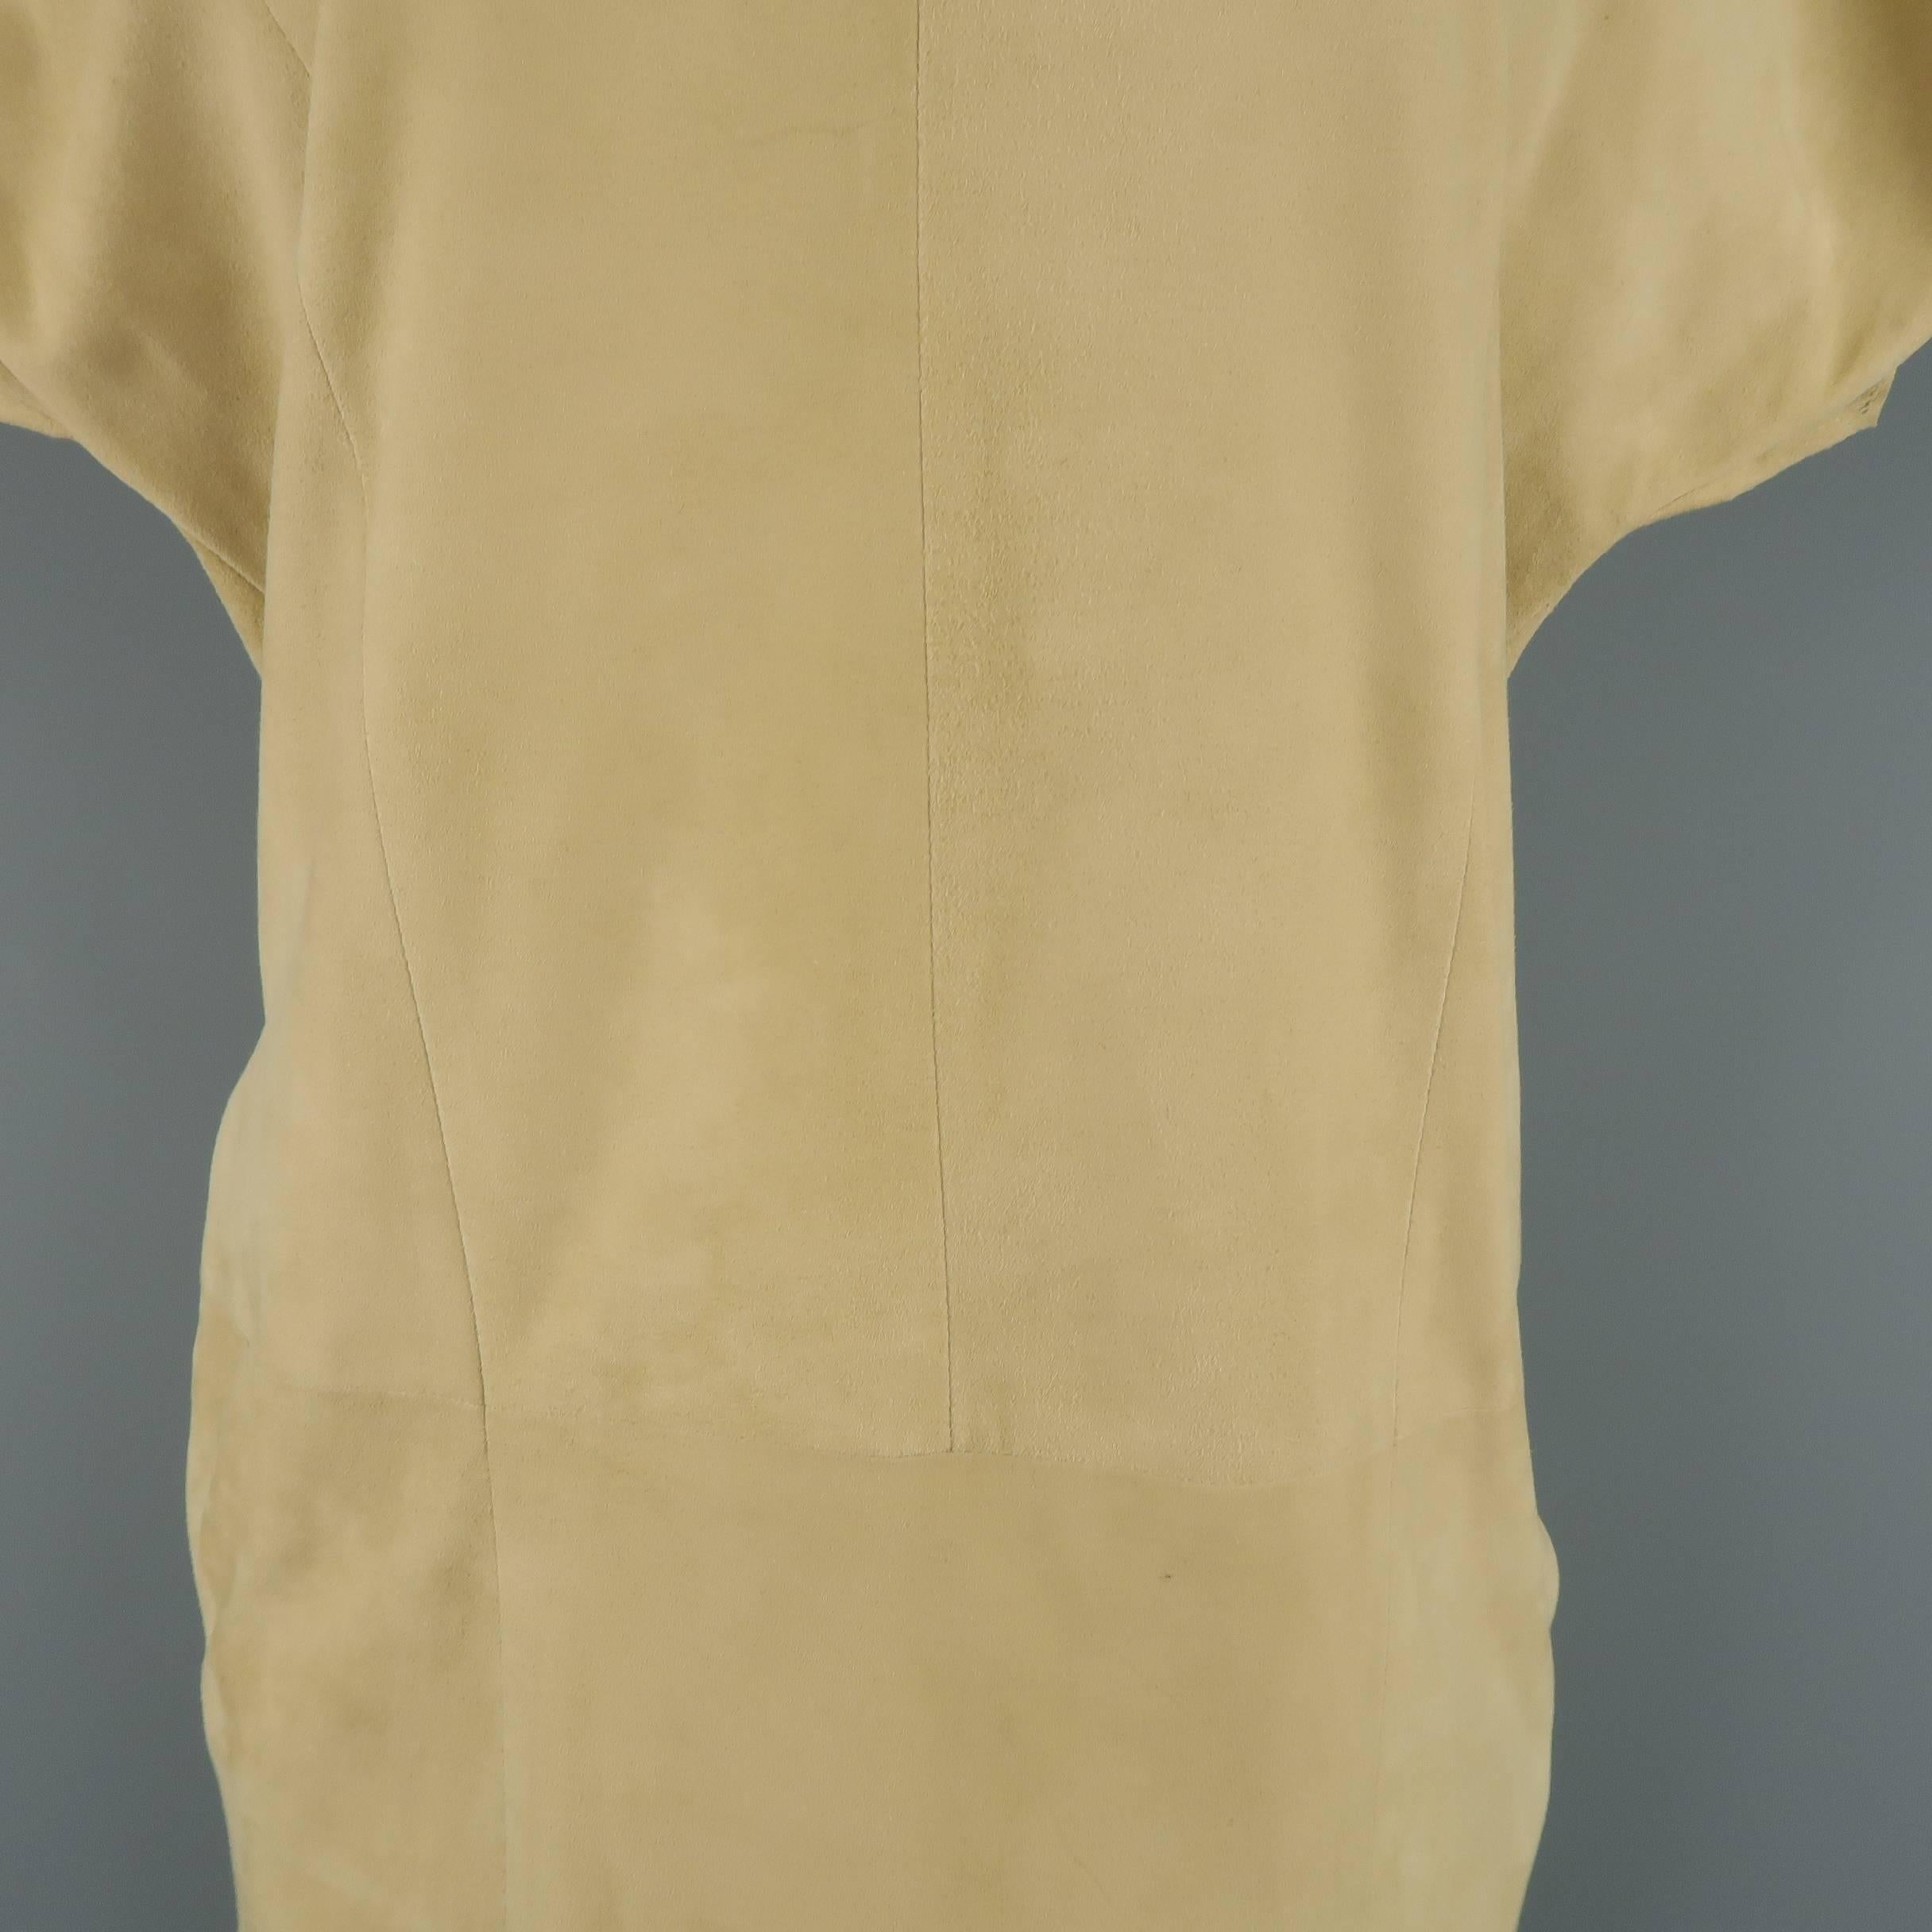 POLO RALPH LAUREN shift dress comes in soft beige suede with a V neck, slit pockets, and batwing sleeves. Discoloration on chest.
 
Fair Pre-Owned Condition.
Marked: S
 
Measurements:
 
Shoulder: 12 in.
Bust: 38 in.
Waist: 38 in.
Hip: 38 in.
Sleeve: